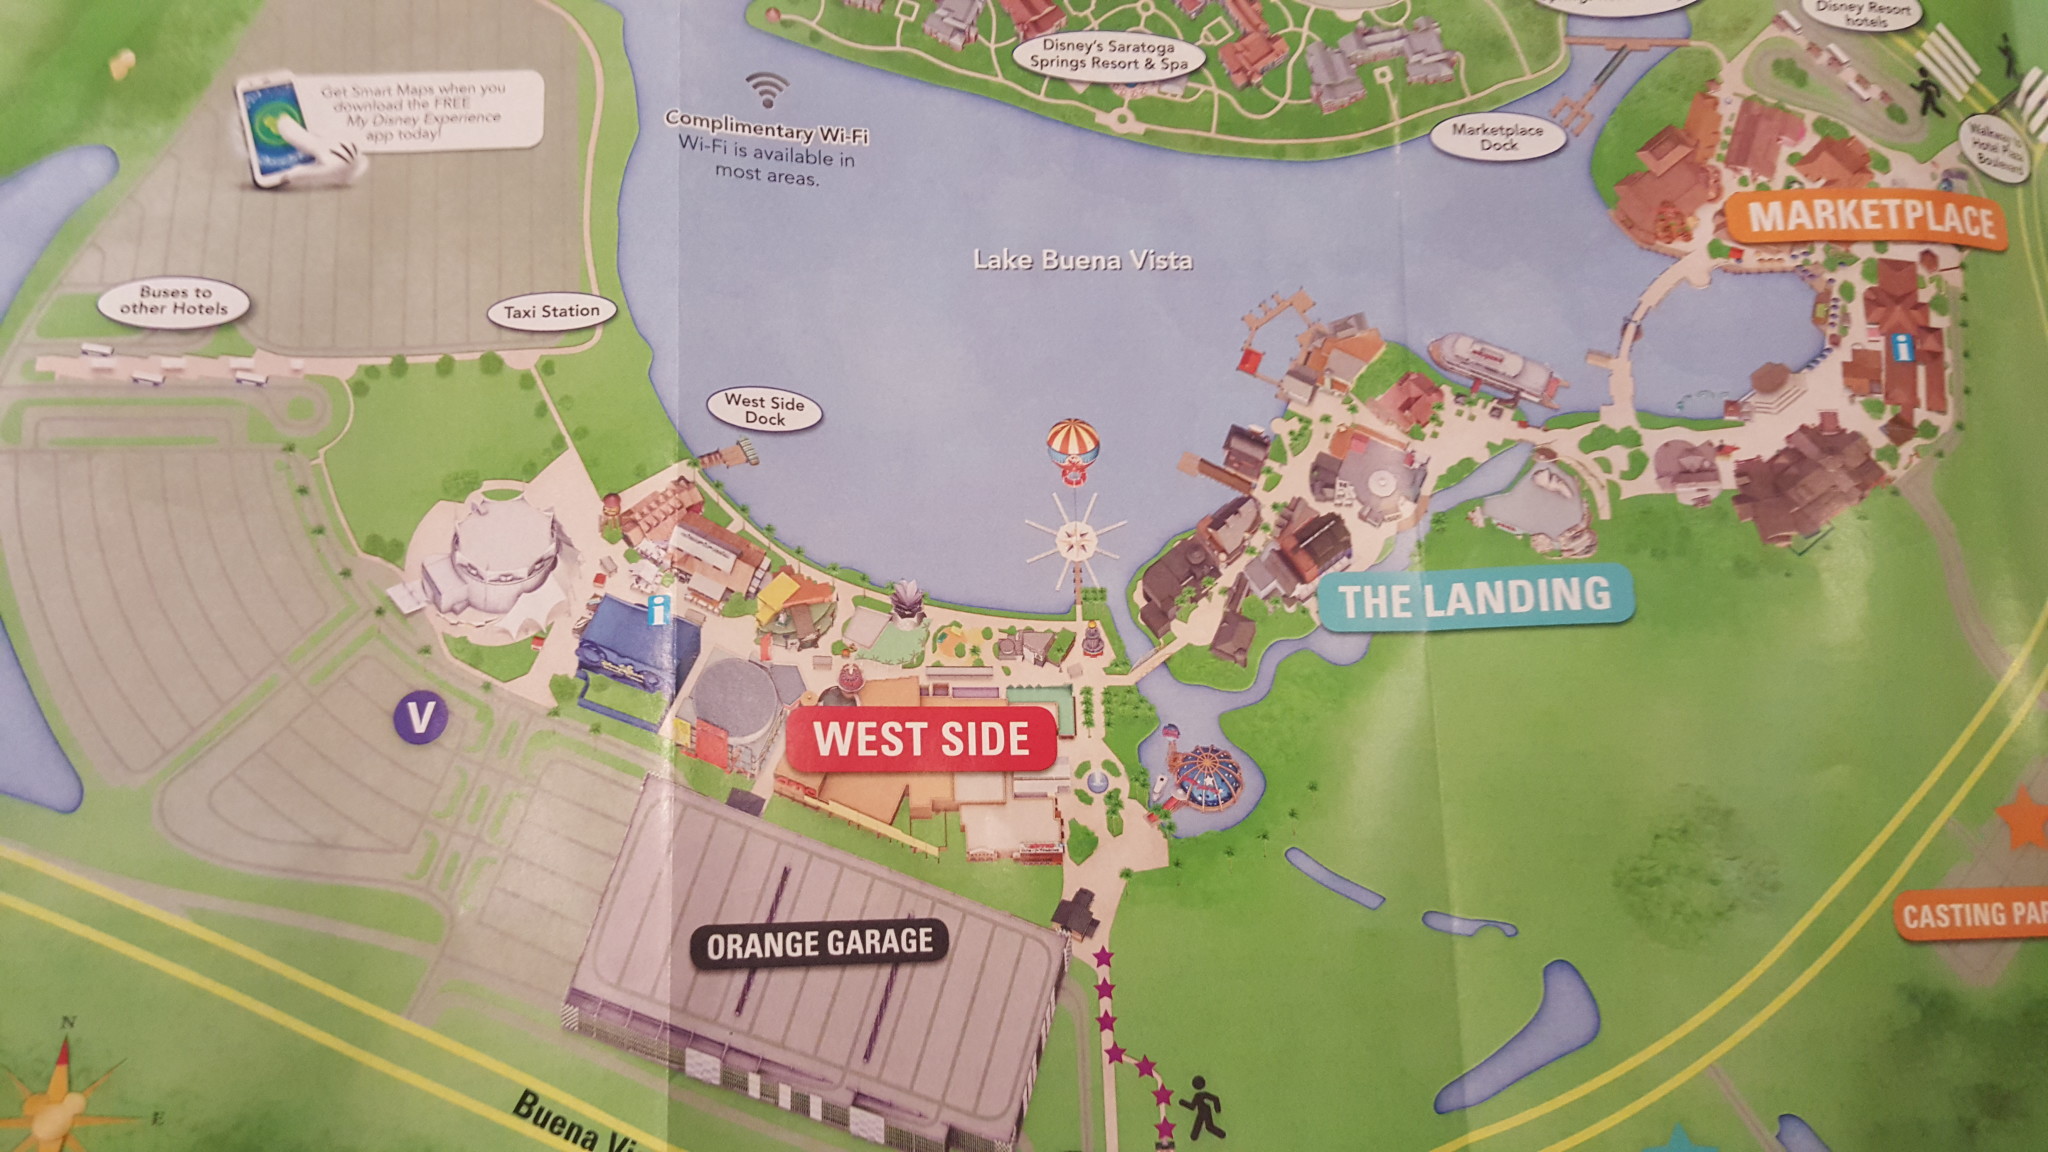 Two New Restaurants Could be on Their Way to Disney Springs